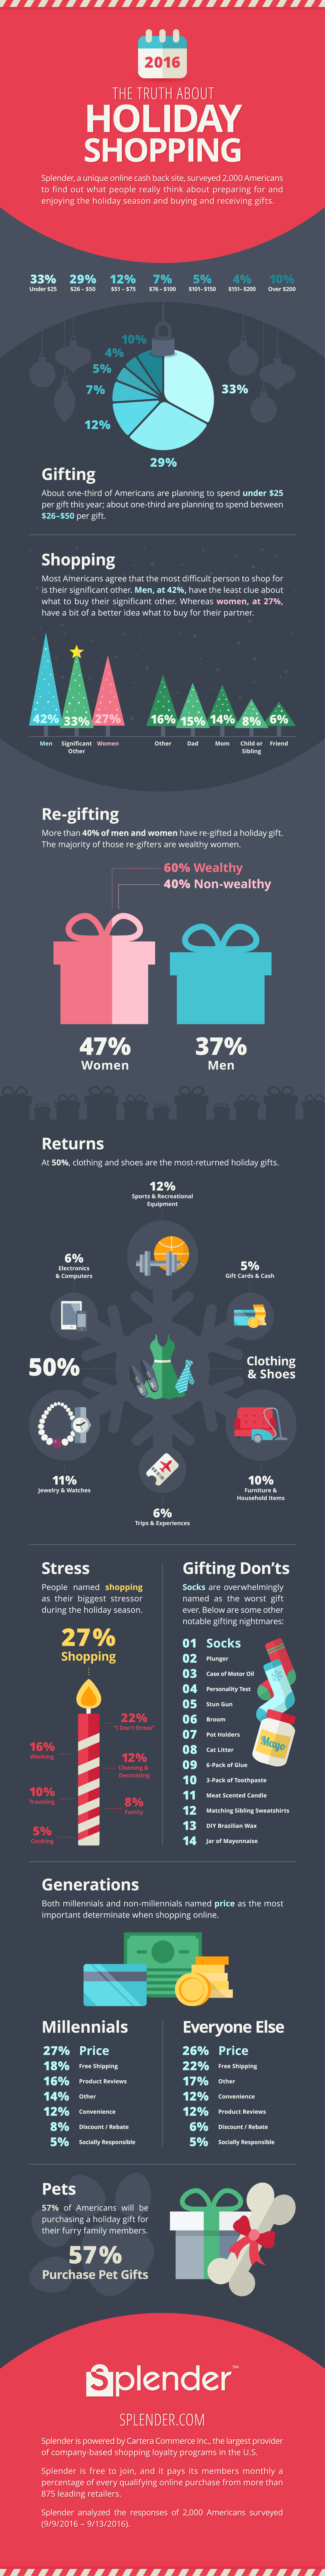 The Truth About Holiday Shopping 2016